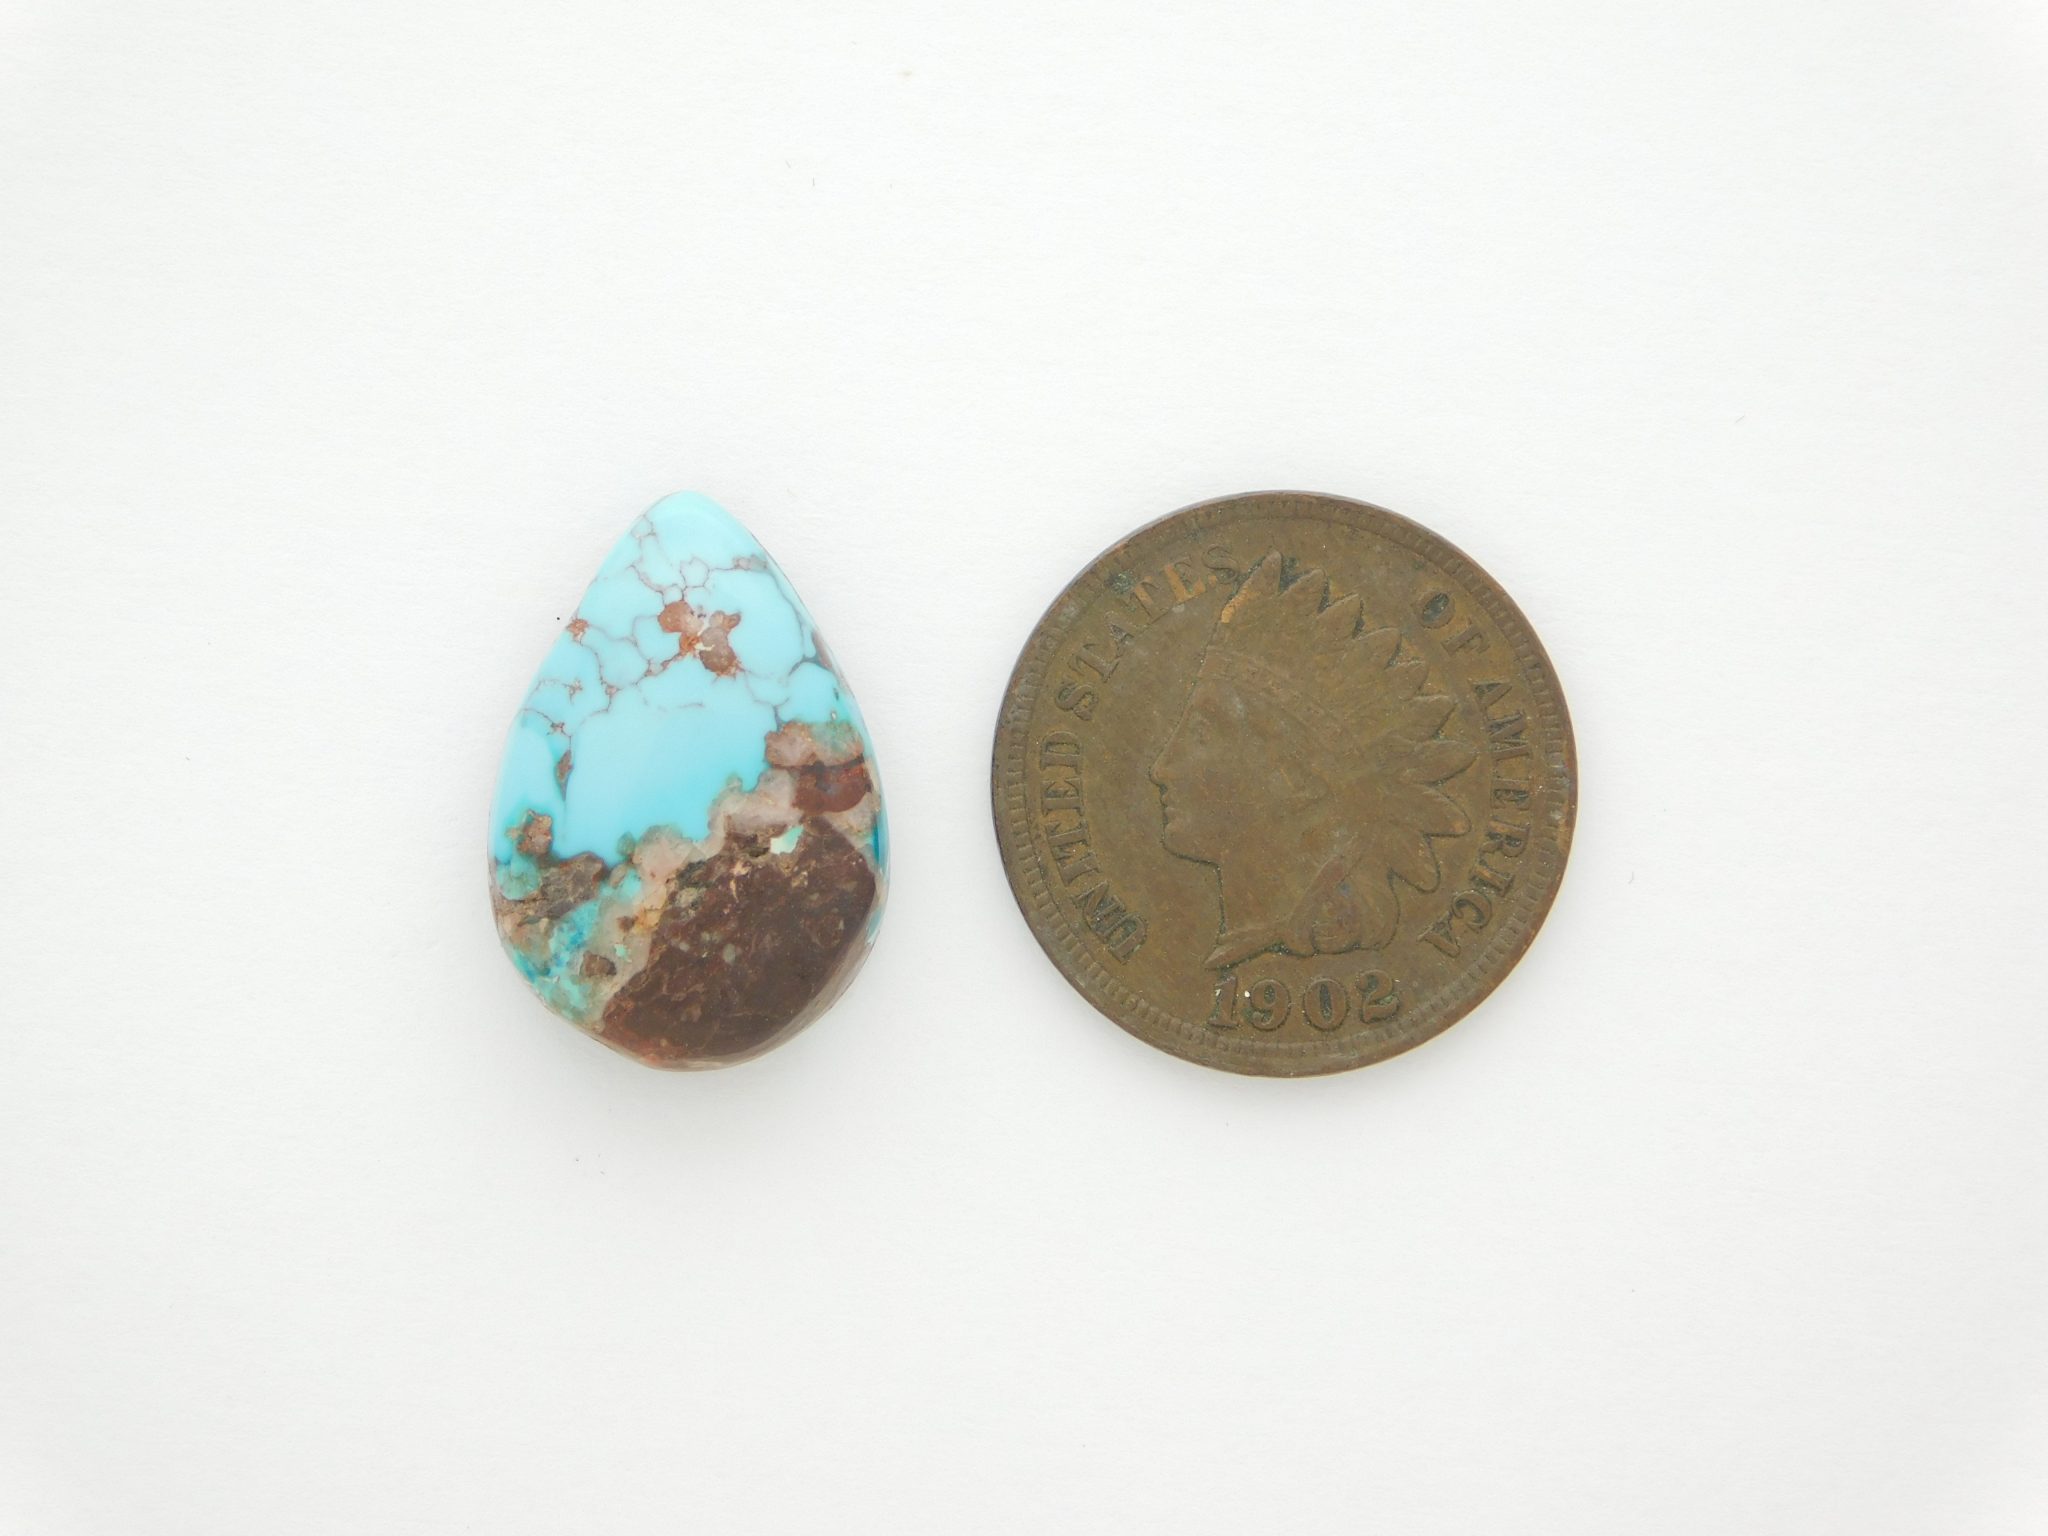 Bisbee Turquoise Cabochon 10 ct.